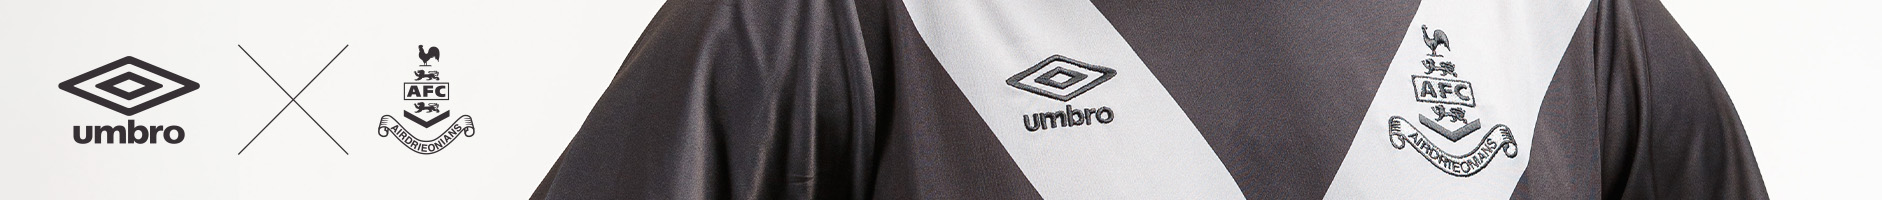 Umbro x Airdrieonians